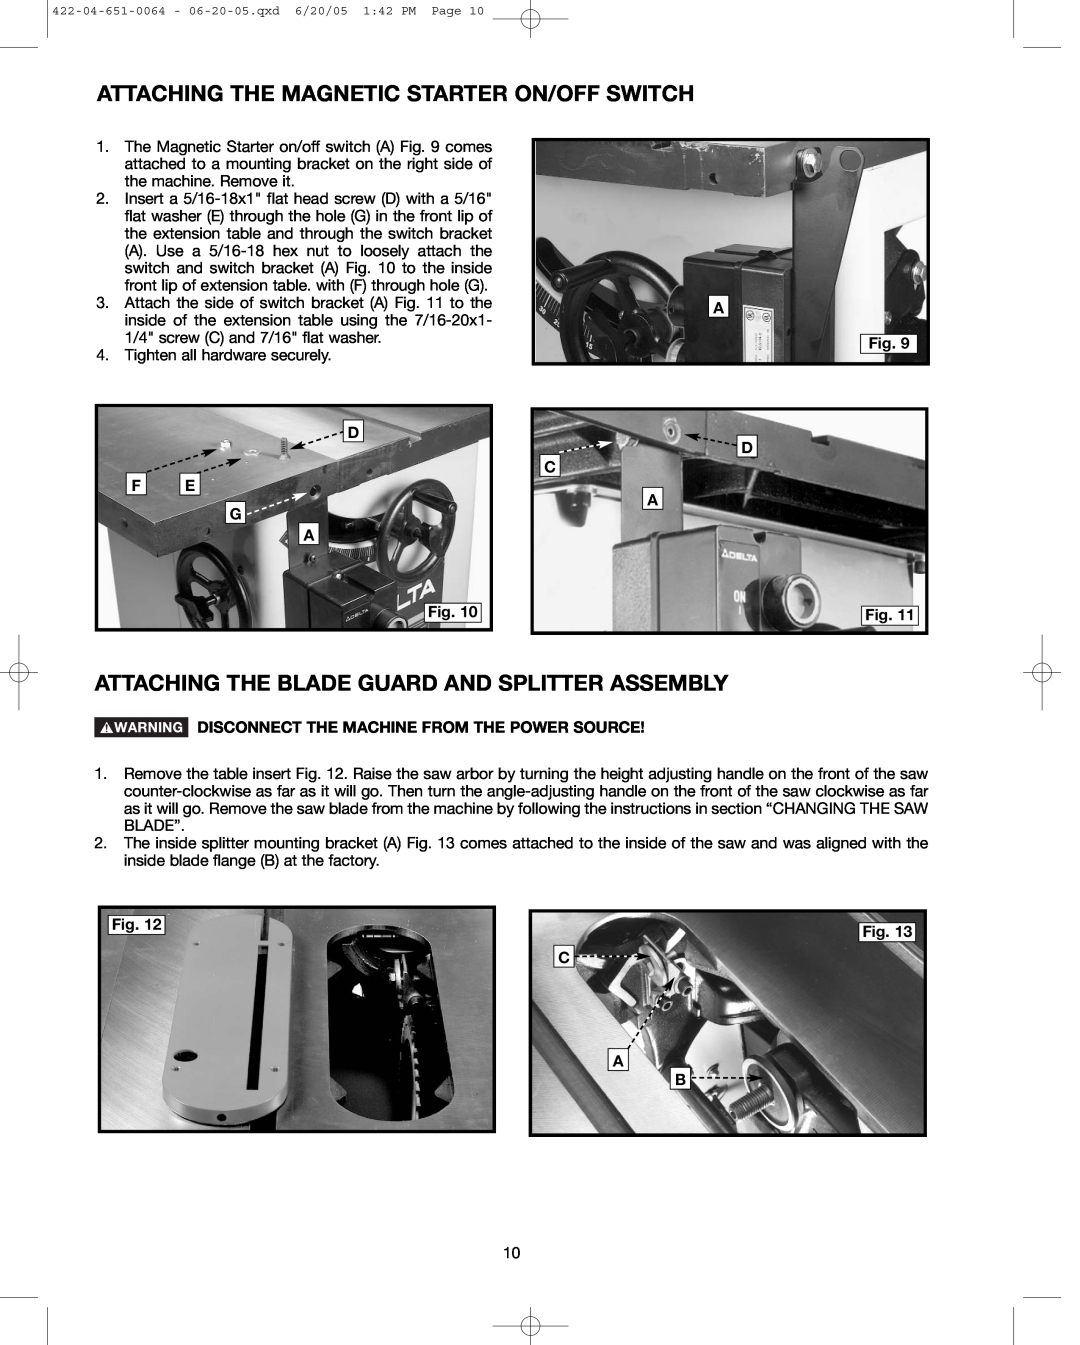 Delta 34-806, 34-814, 34-801 Attaching The Magnetic Starter On/Off Switch, Attaching The Blade Guard And Splitter Assembly 